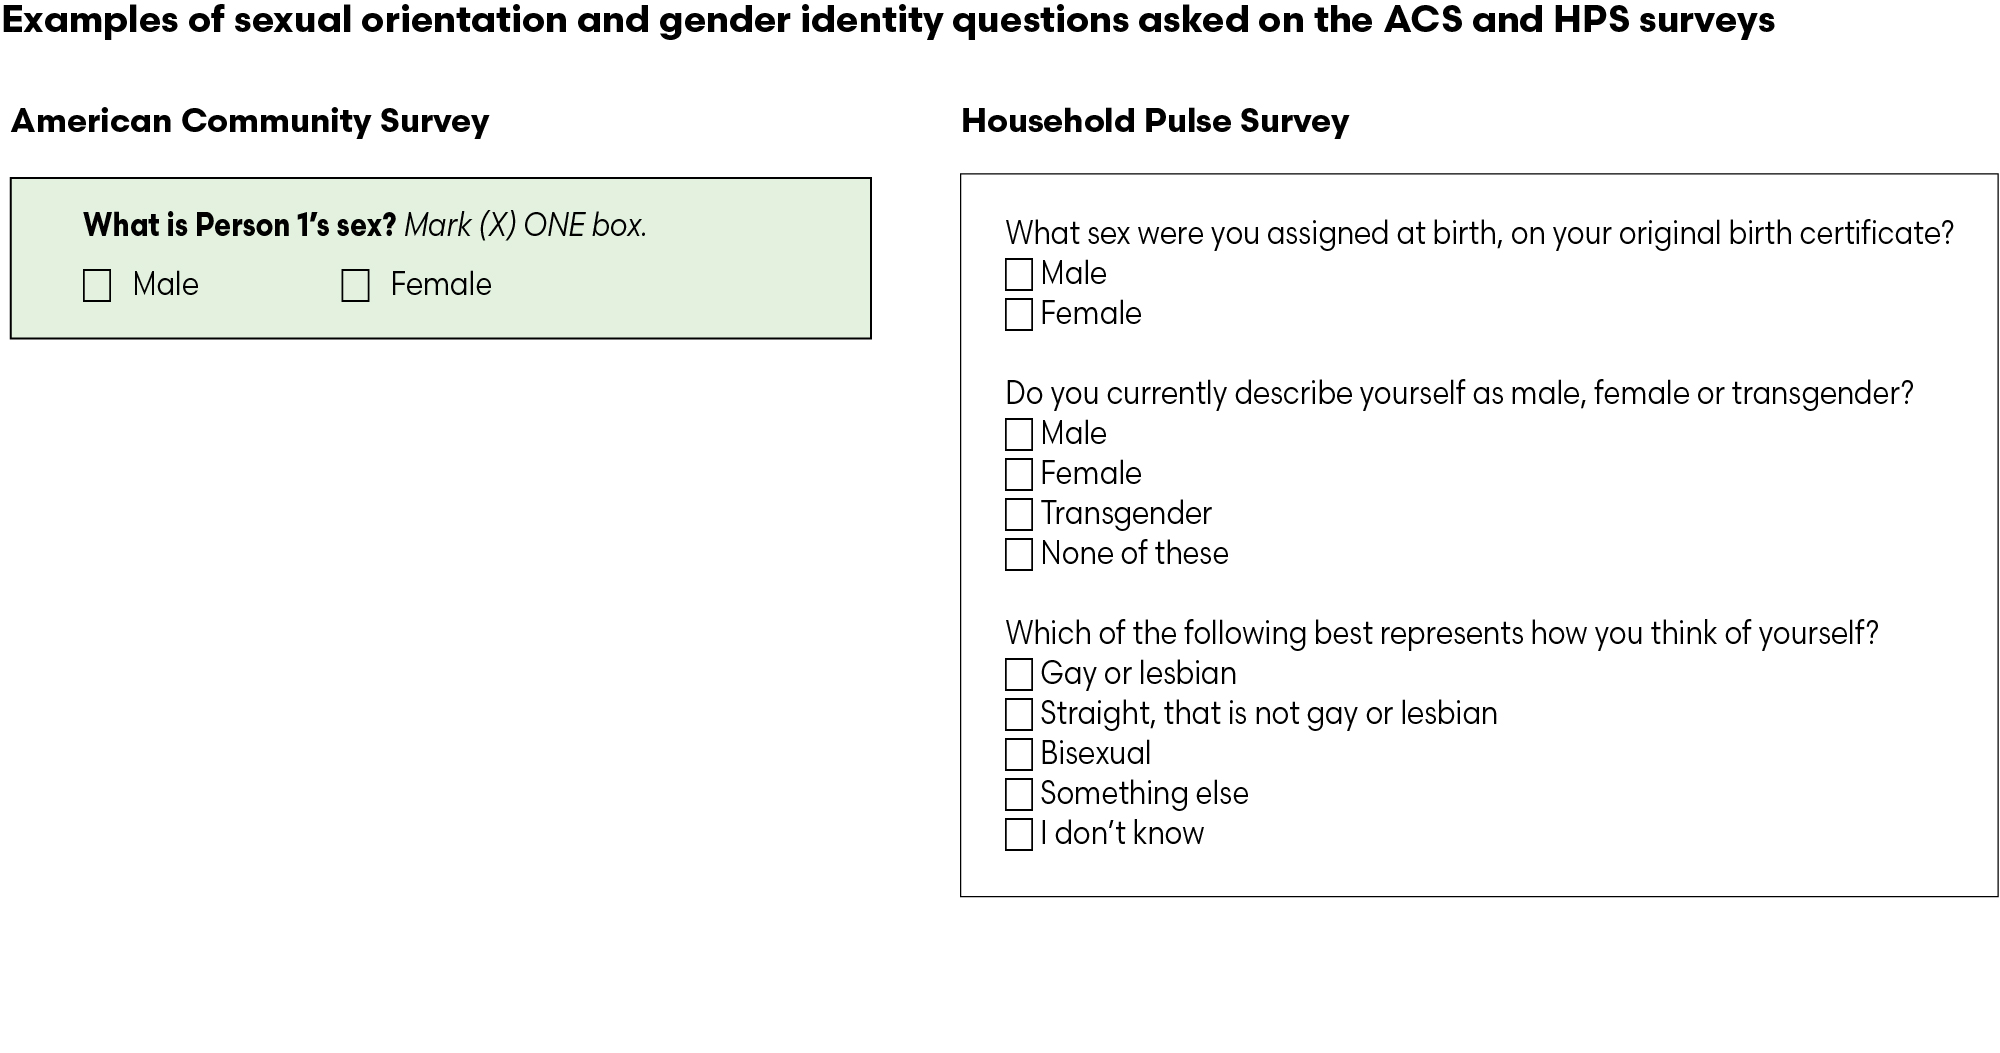 Image of the questions that ACS and HPS ask on their surveys. The ACS asks one question about sex: "What is person's sex? Male or Female." HSP asks "What sex were you assigned at birth, on your original birth certificate? Male or Female" "Do you currently describe yourself as male, female or transgender?" - Male, female, transgender or none of these, "Which of the following best represents how you think of yourself?" -  gay or lesbian, straight, that is not gay or lesbian, bisexual, something else, I don't know.